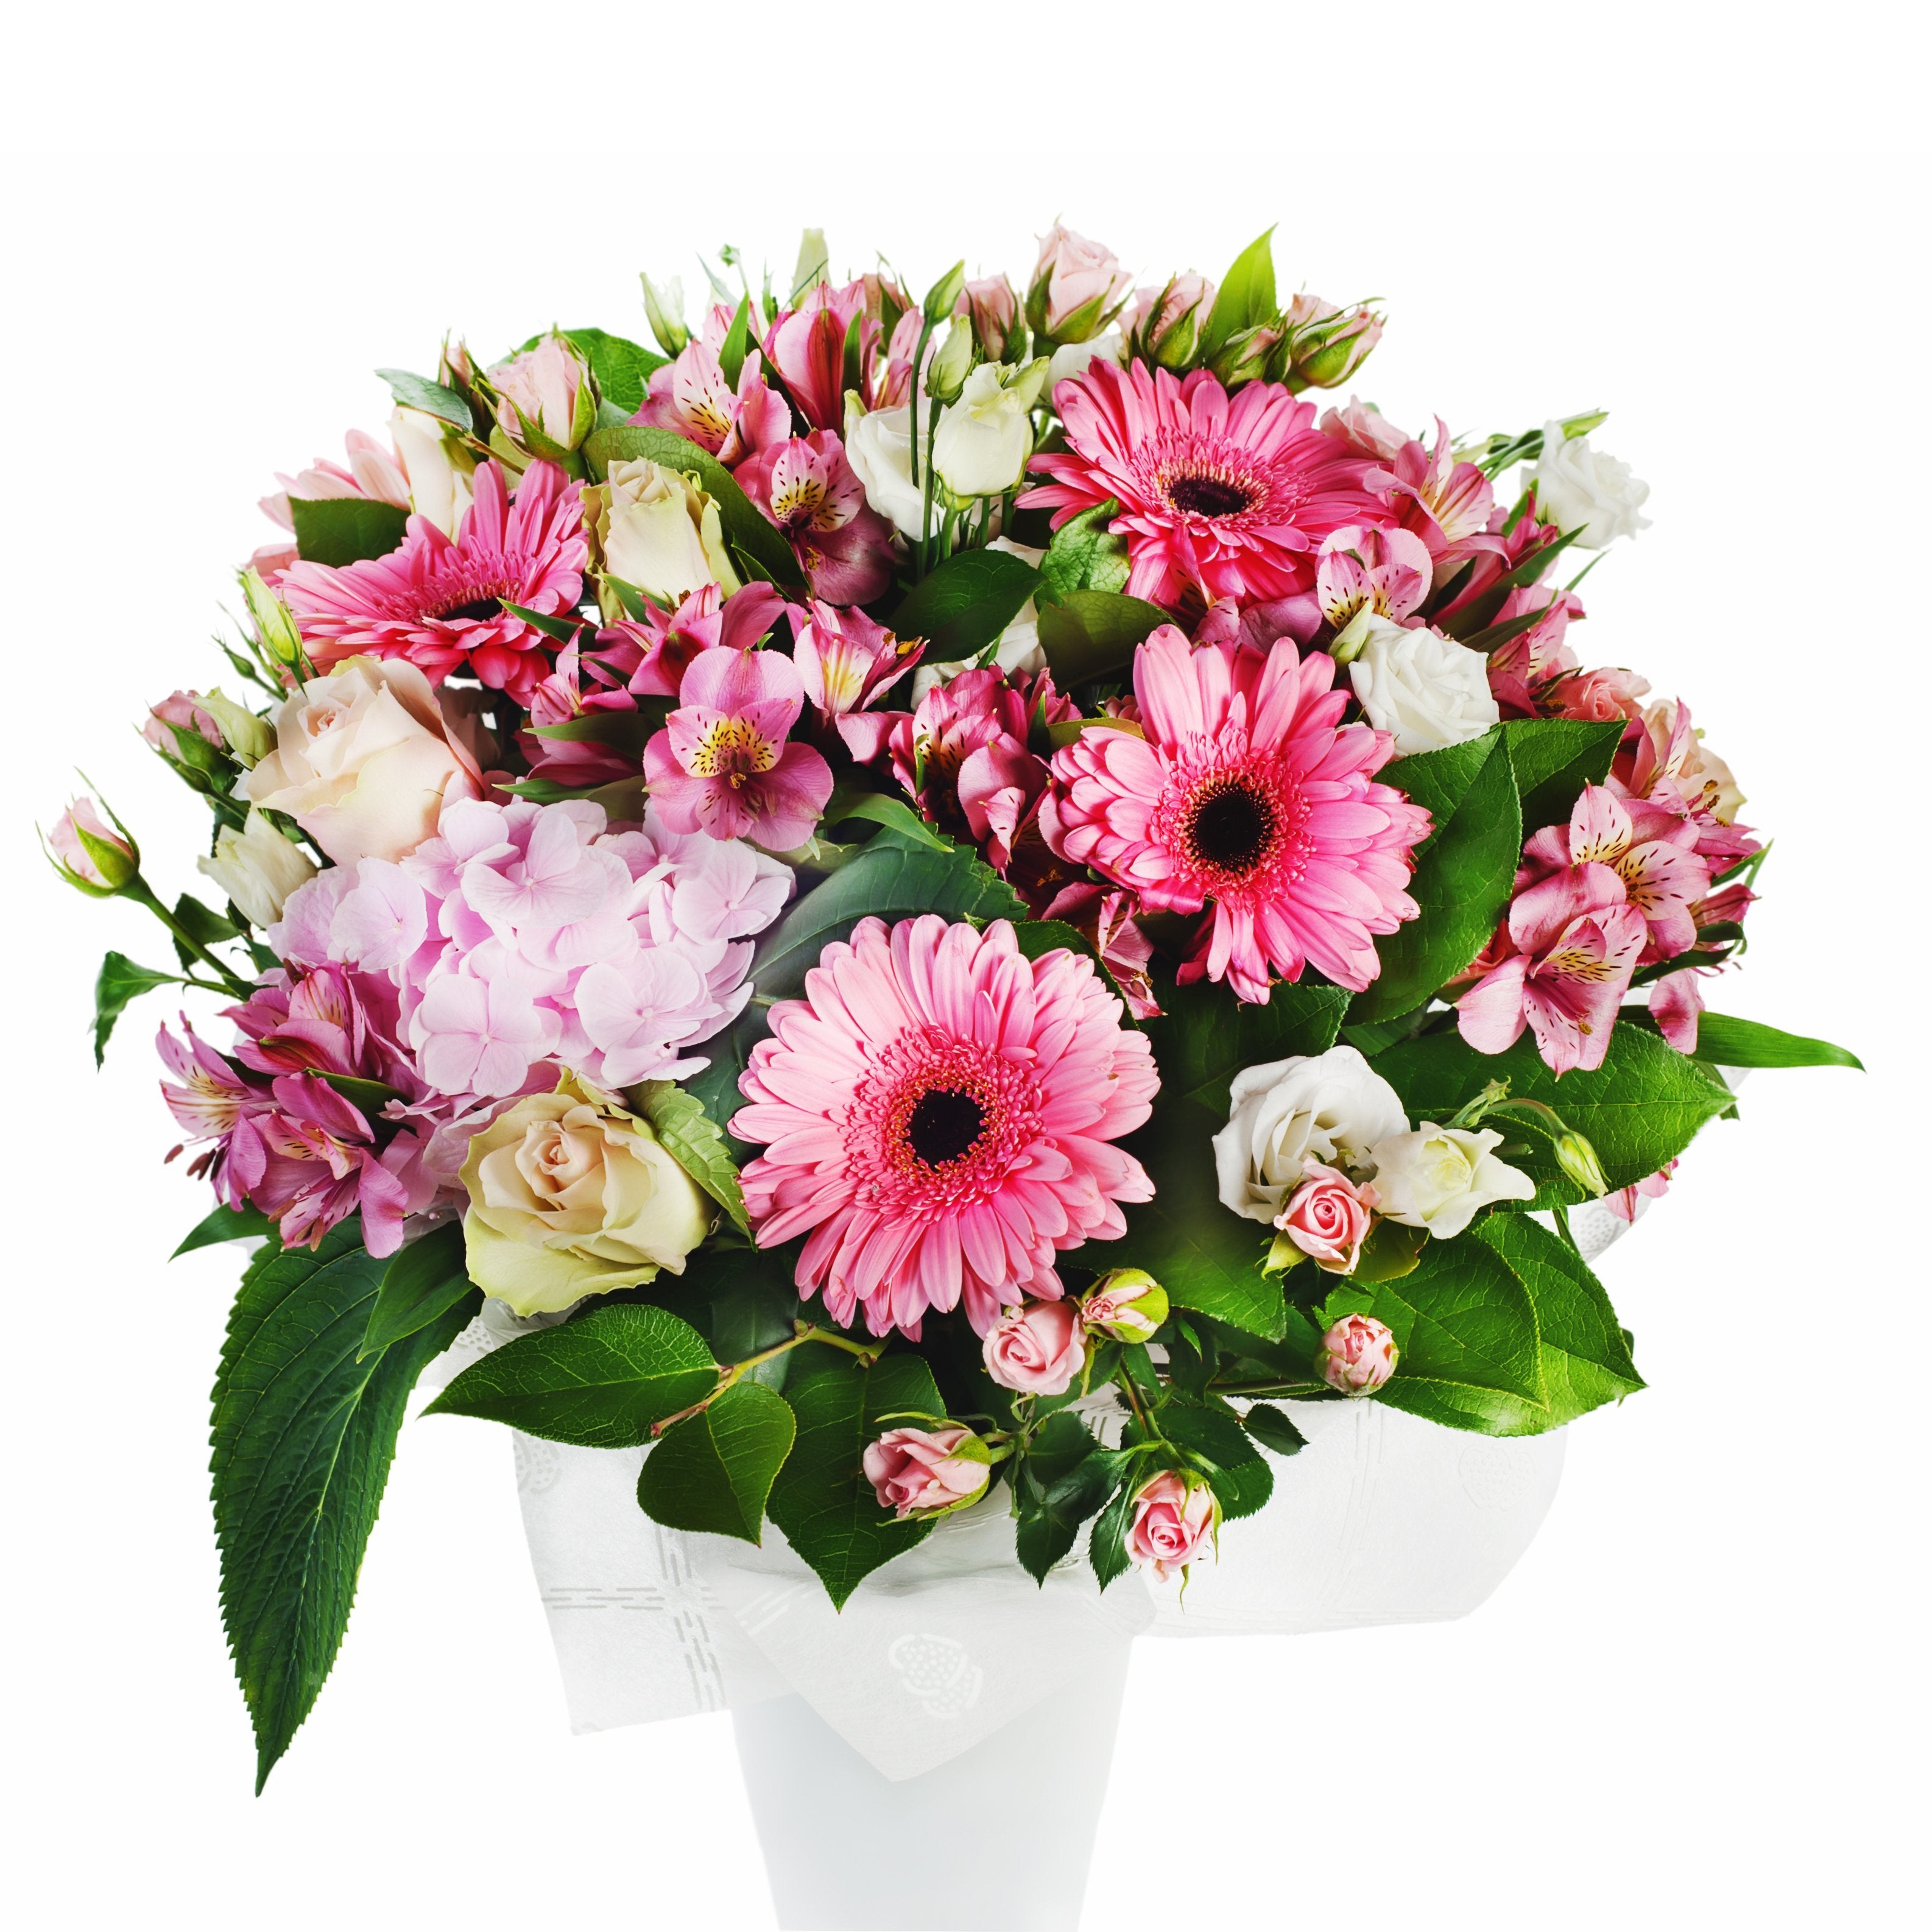 New Baby Flower Bouquets with Same Day Flower Delivery Dublin or Next Day Flowers Delivery Ireland